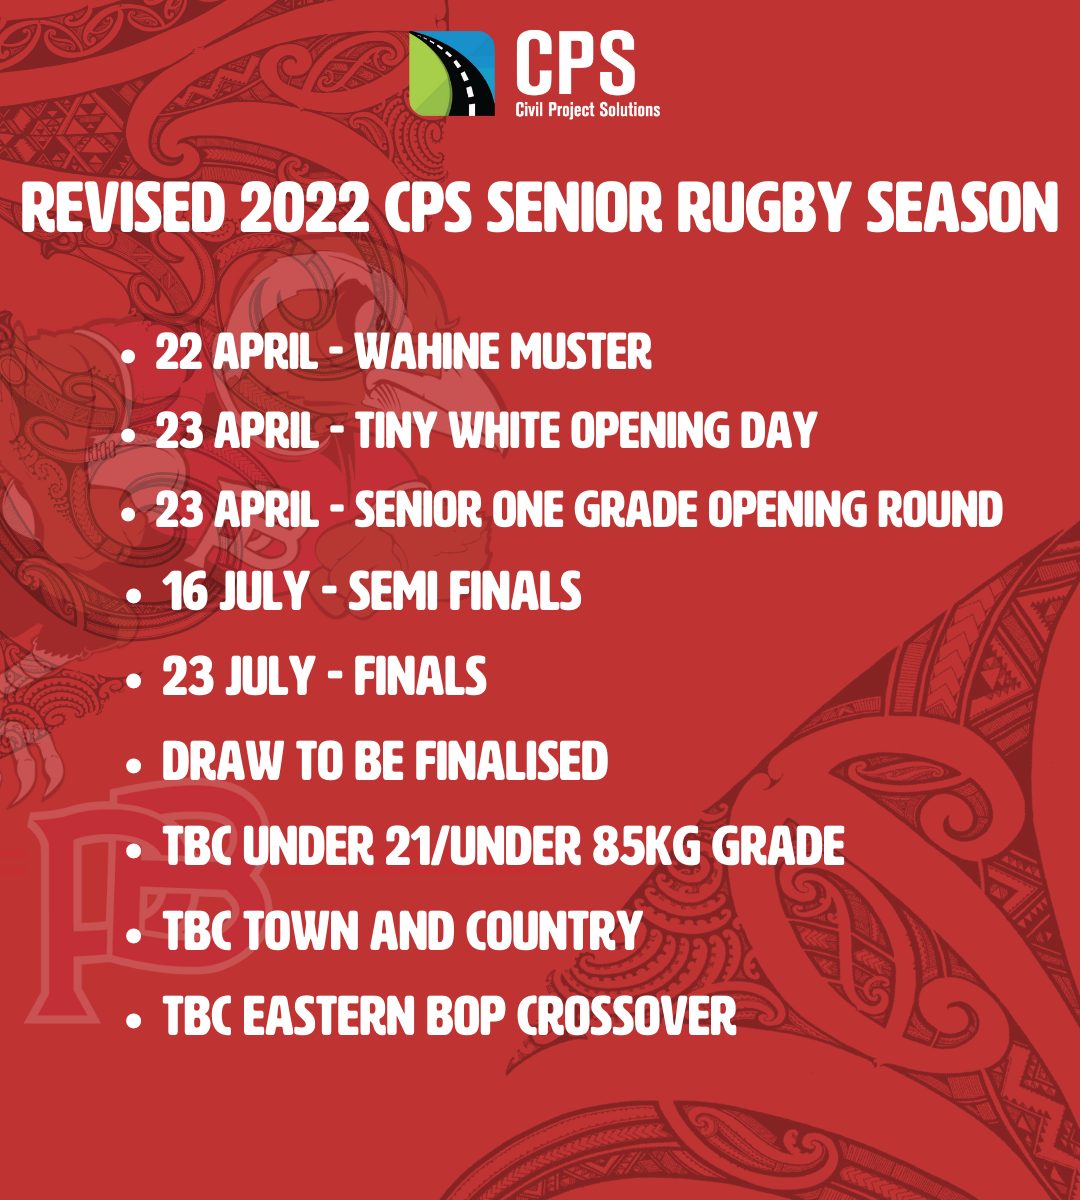 CPS SENIOR RUGBY DELAYED START TO 23 APRIL